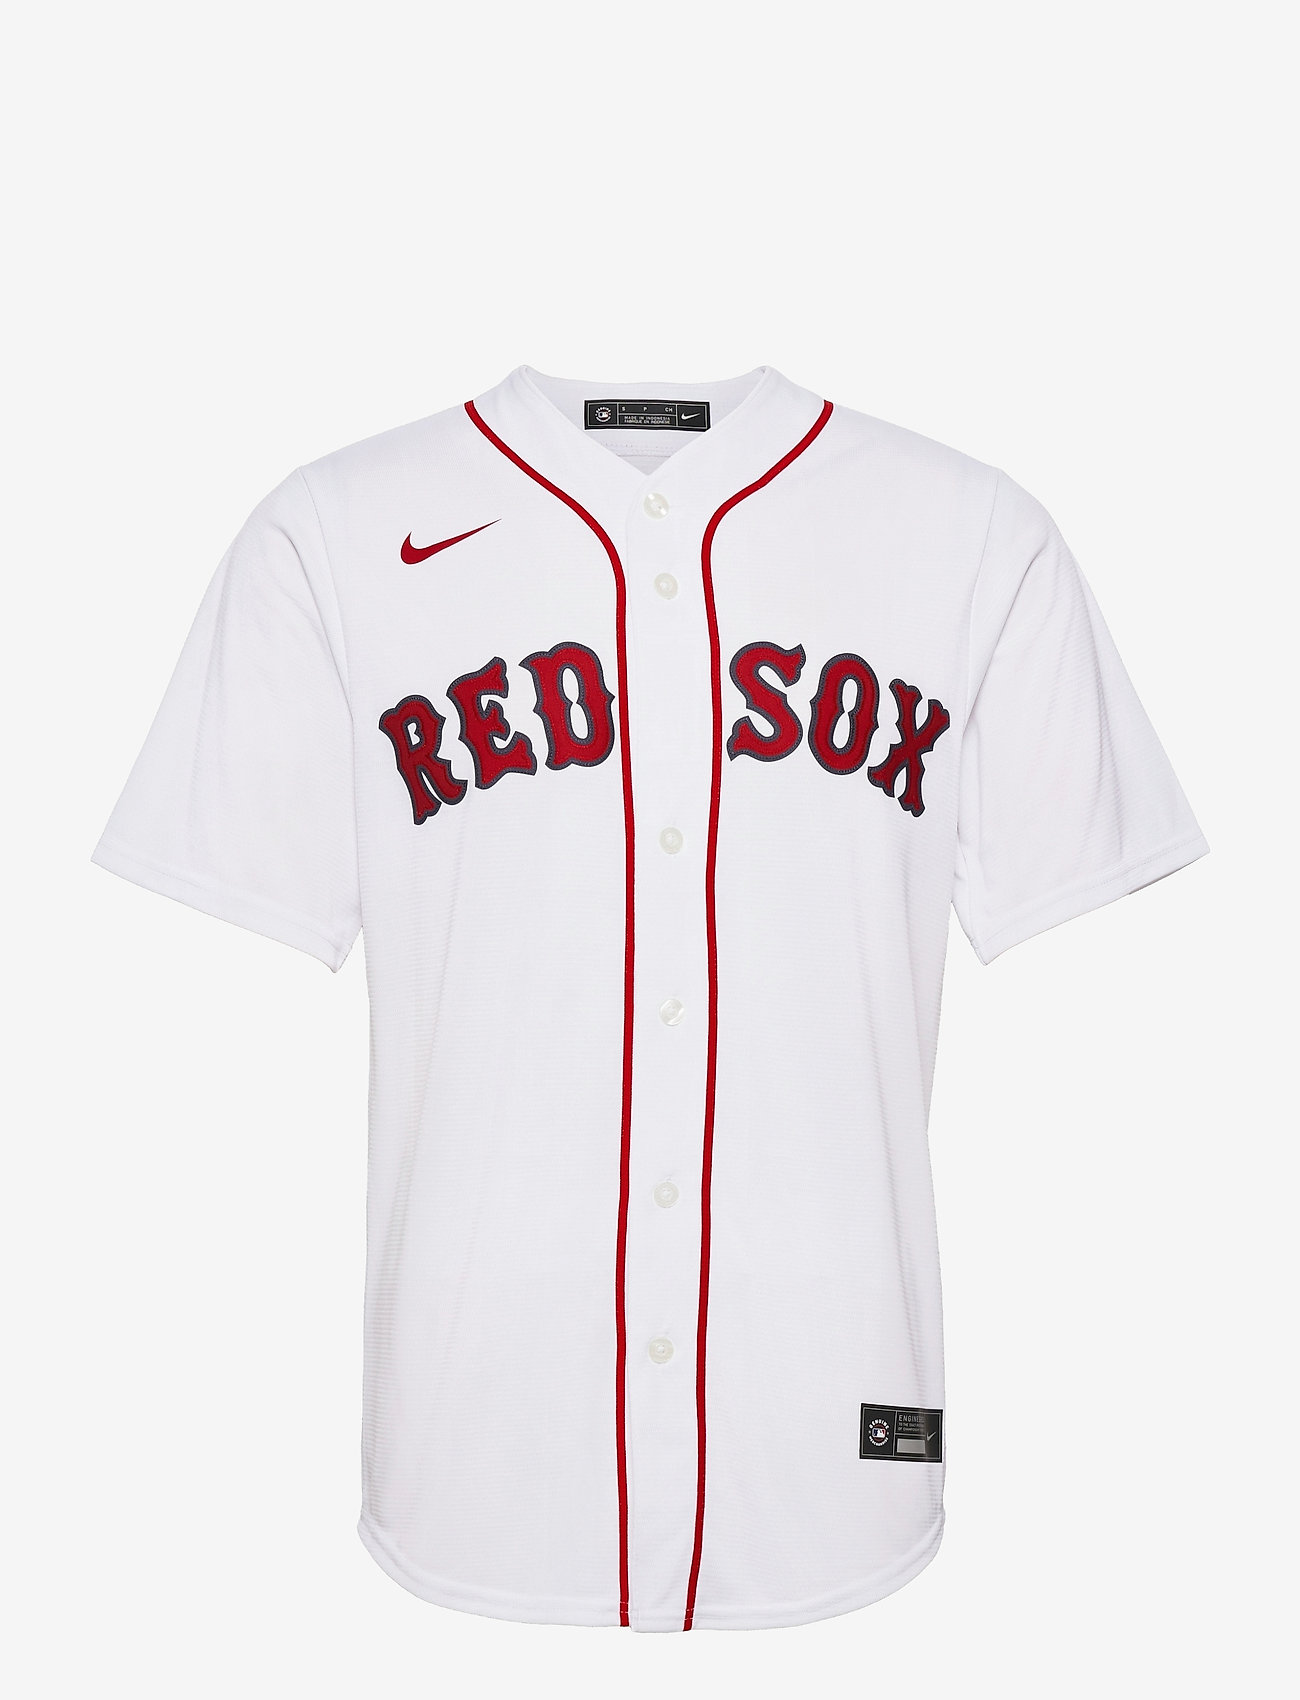 boston red sox home jersey